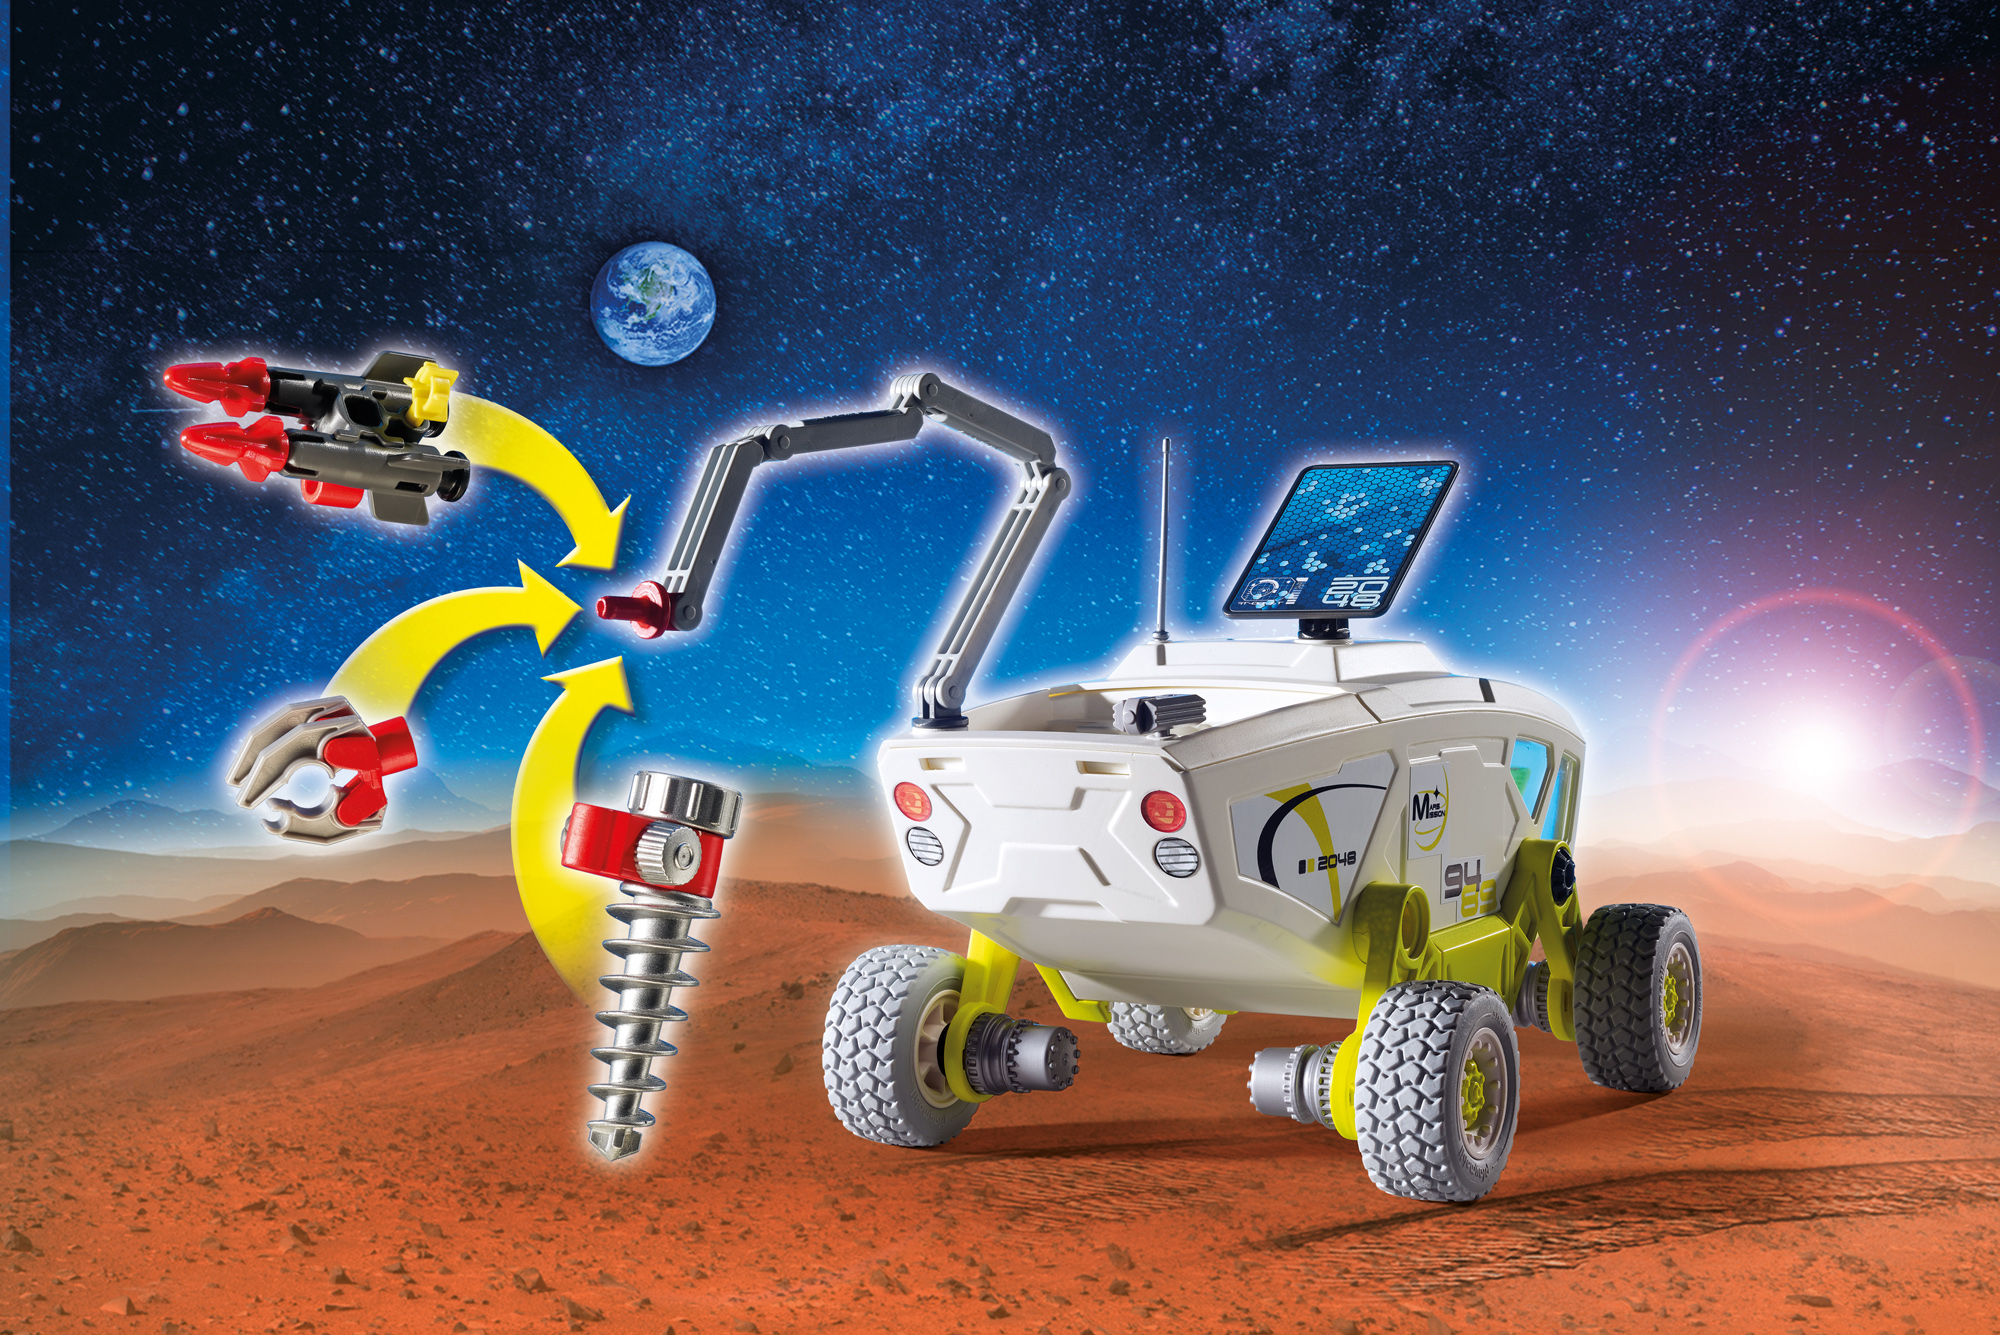 PLAYMOBIL Mars Research Vehicle - image 3 of 7